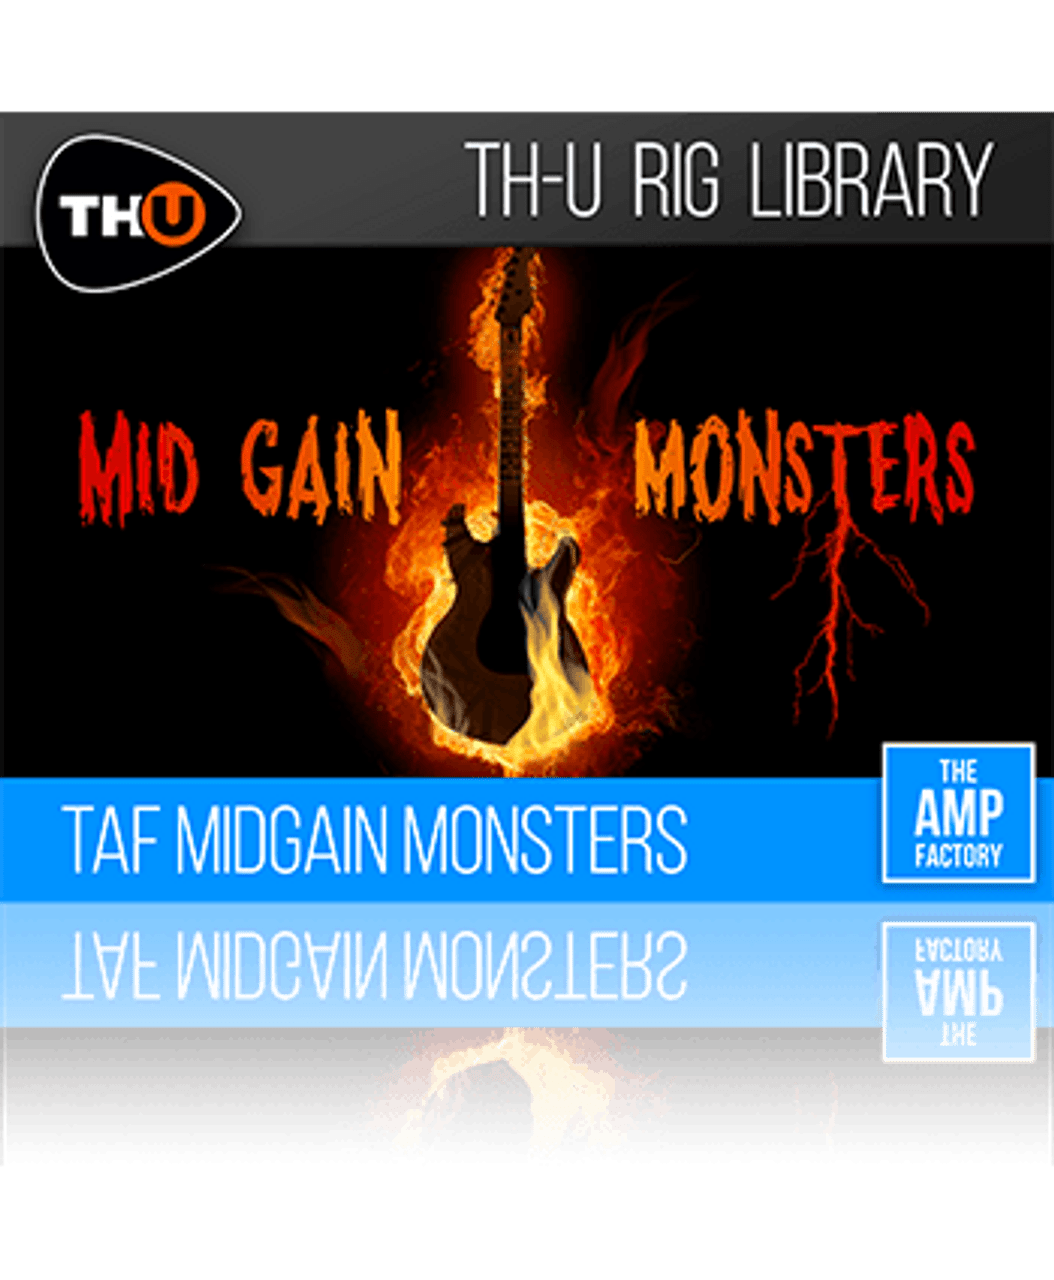 TAF Midgain Monsters - Rig Library for TH-U